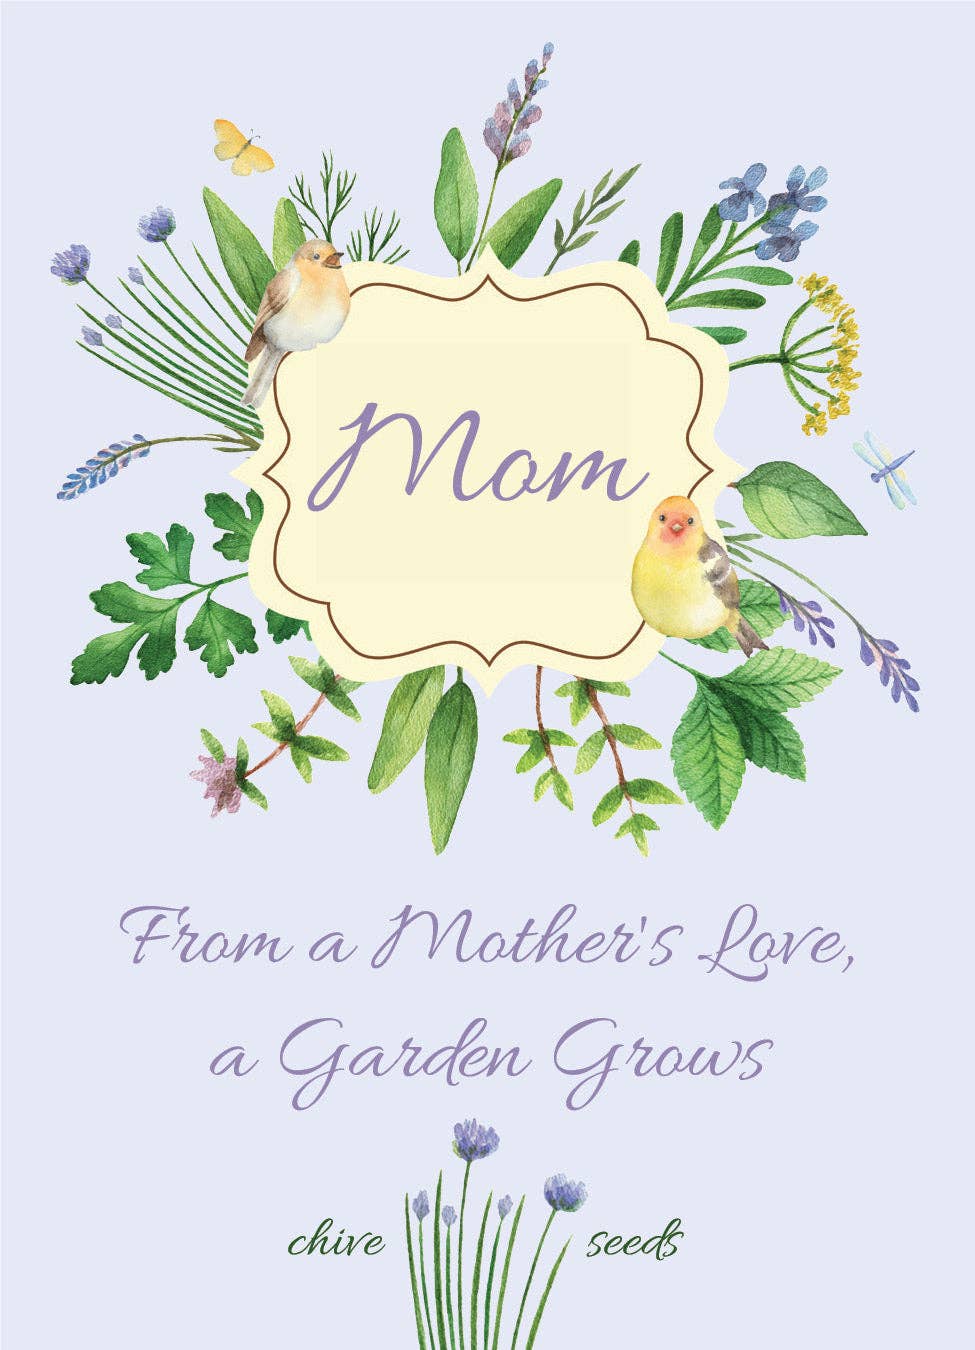 From a Mother's Love - Chives Herb Seed Packets